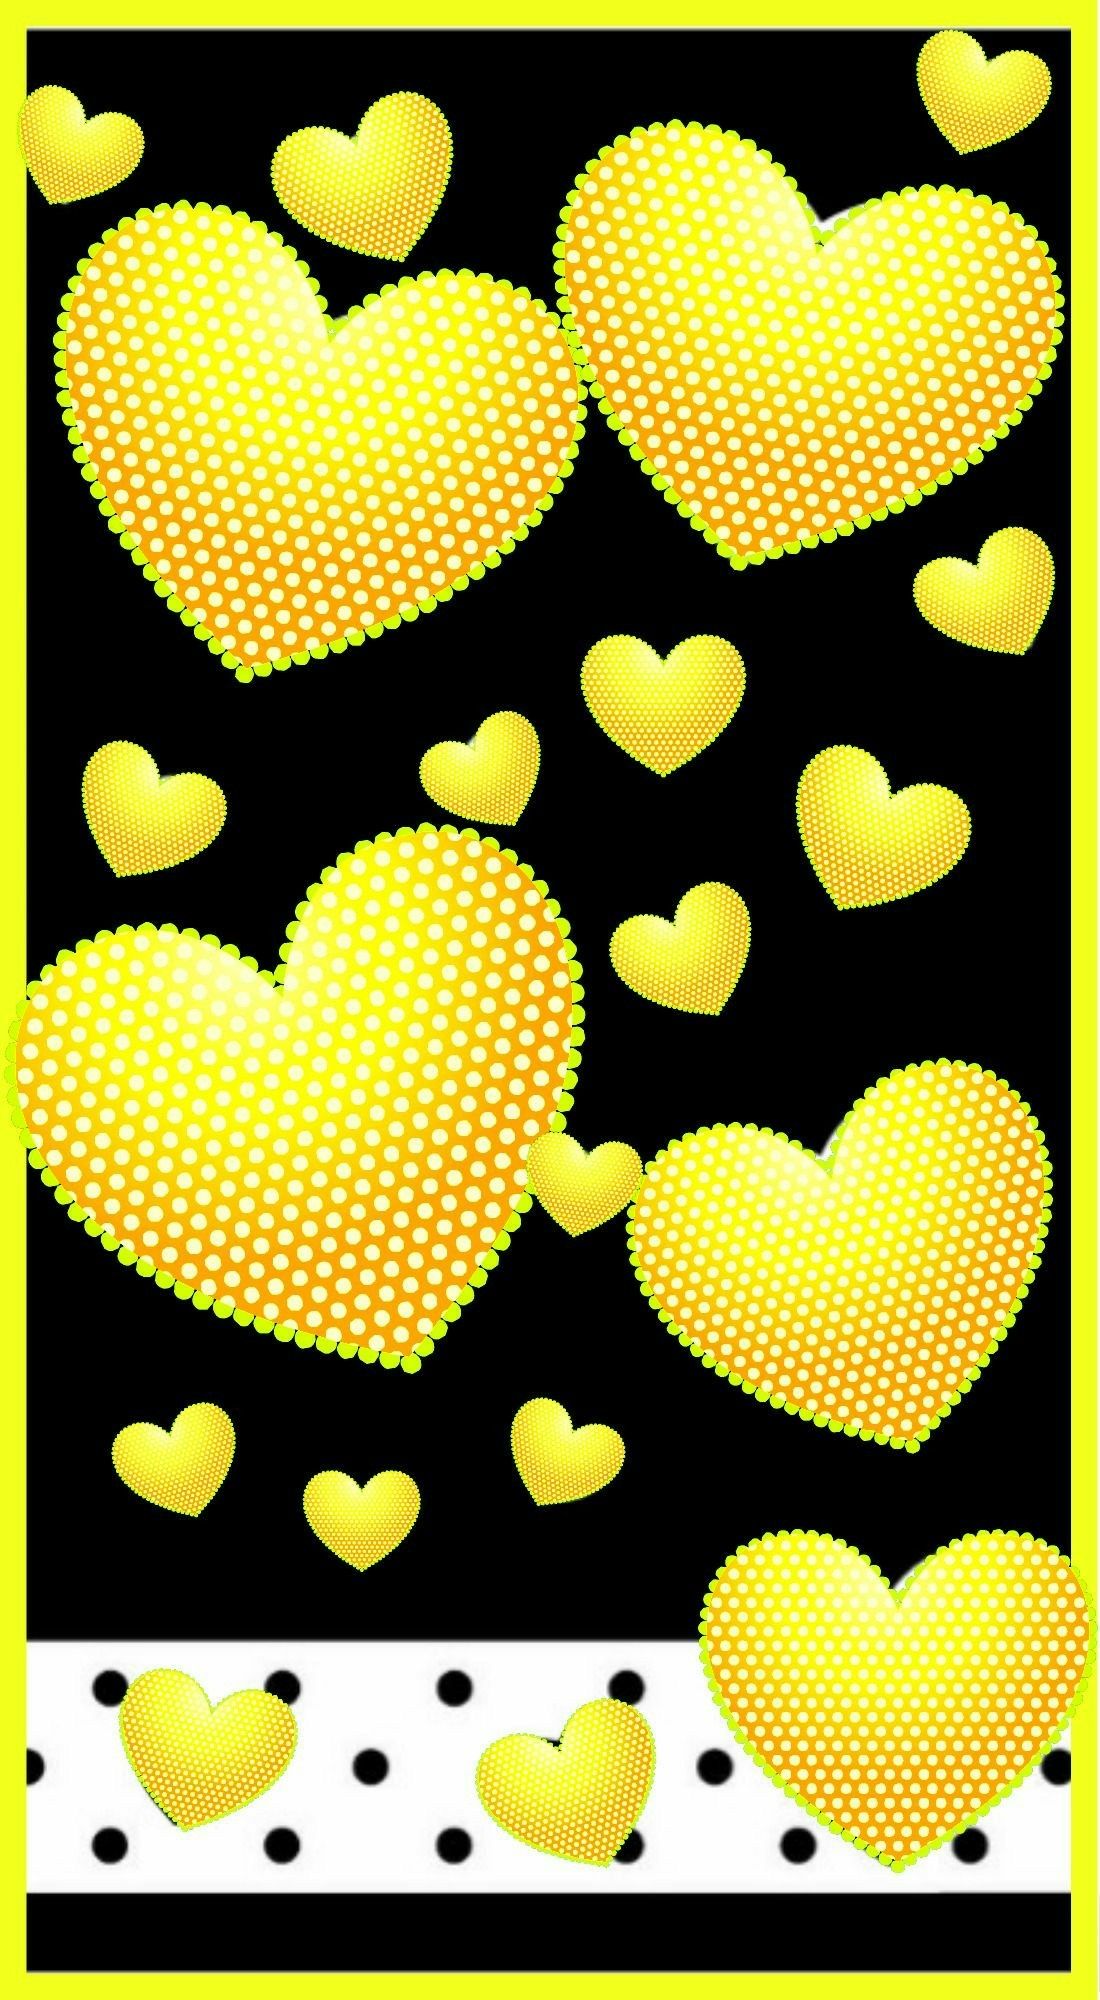 Pin by Veronica Gray on matching wallpapers | Heart wallpaper, Yellow heart,  Yellow wallpaper